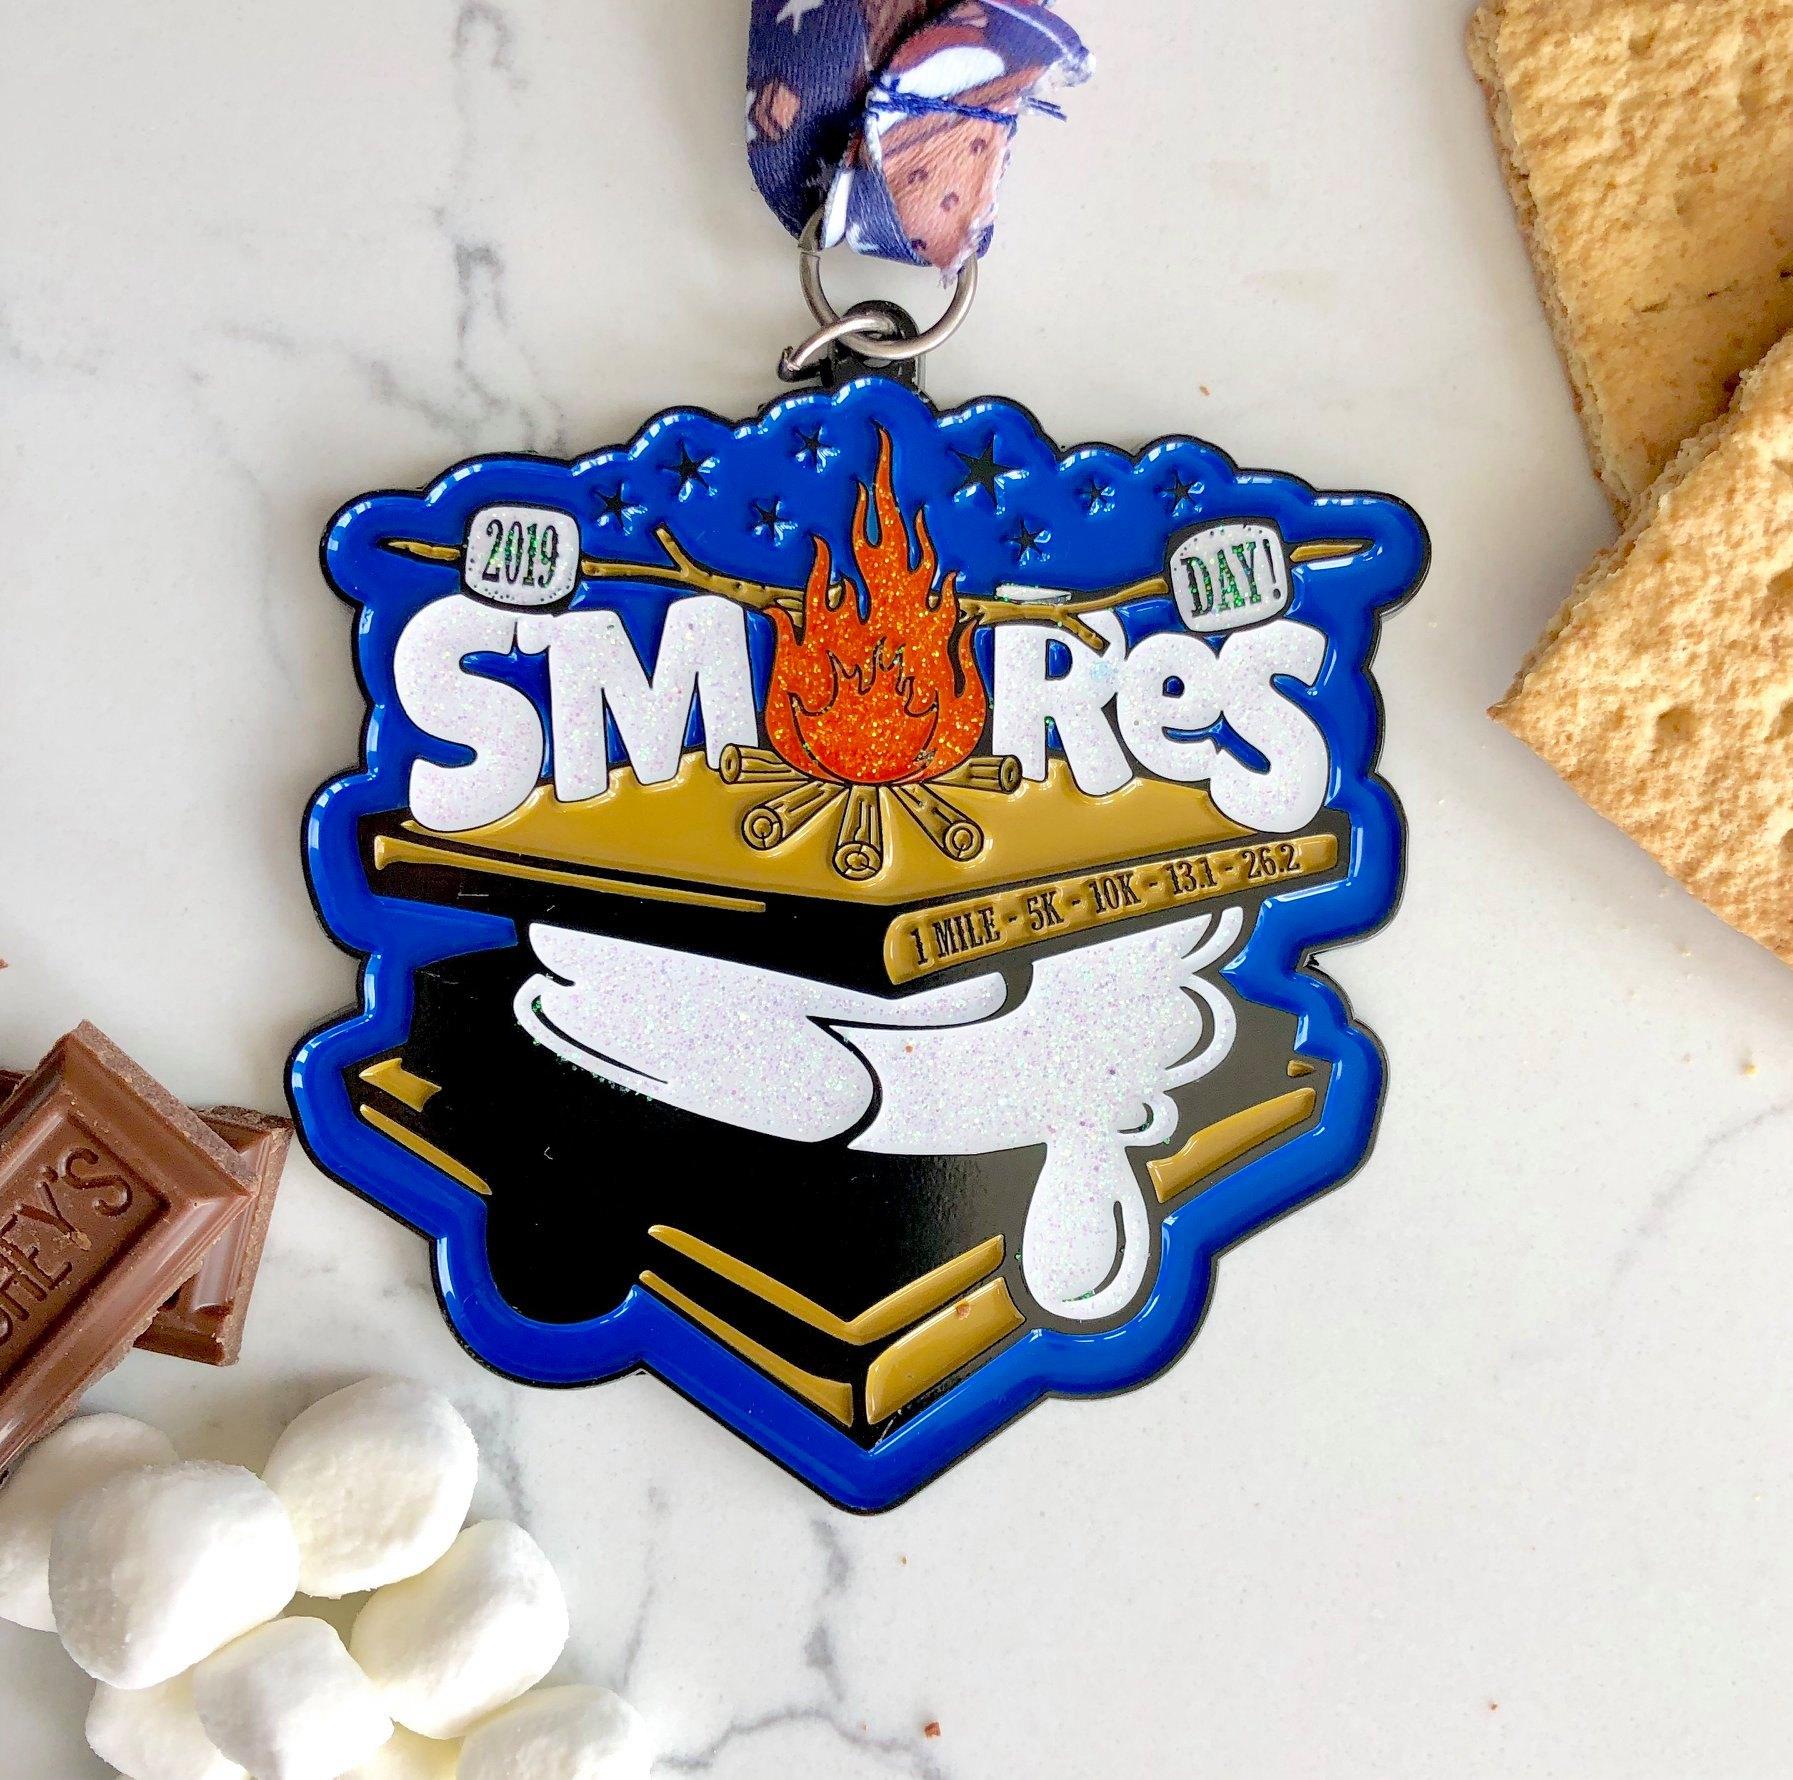 Only $8! S'mores Day 1 Mile, 5K, 10K, 13.1, 26.2 -Annapolis